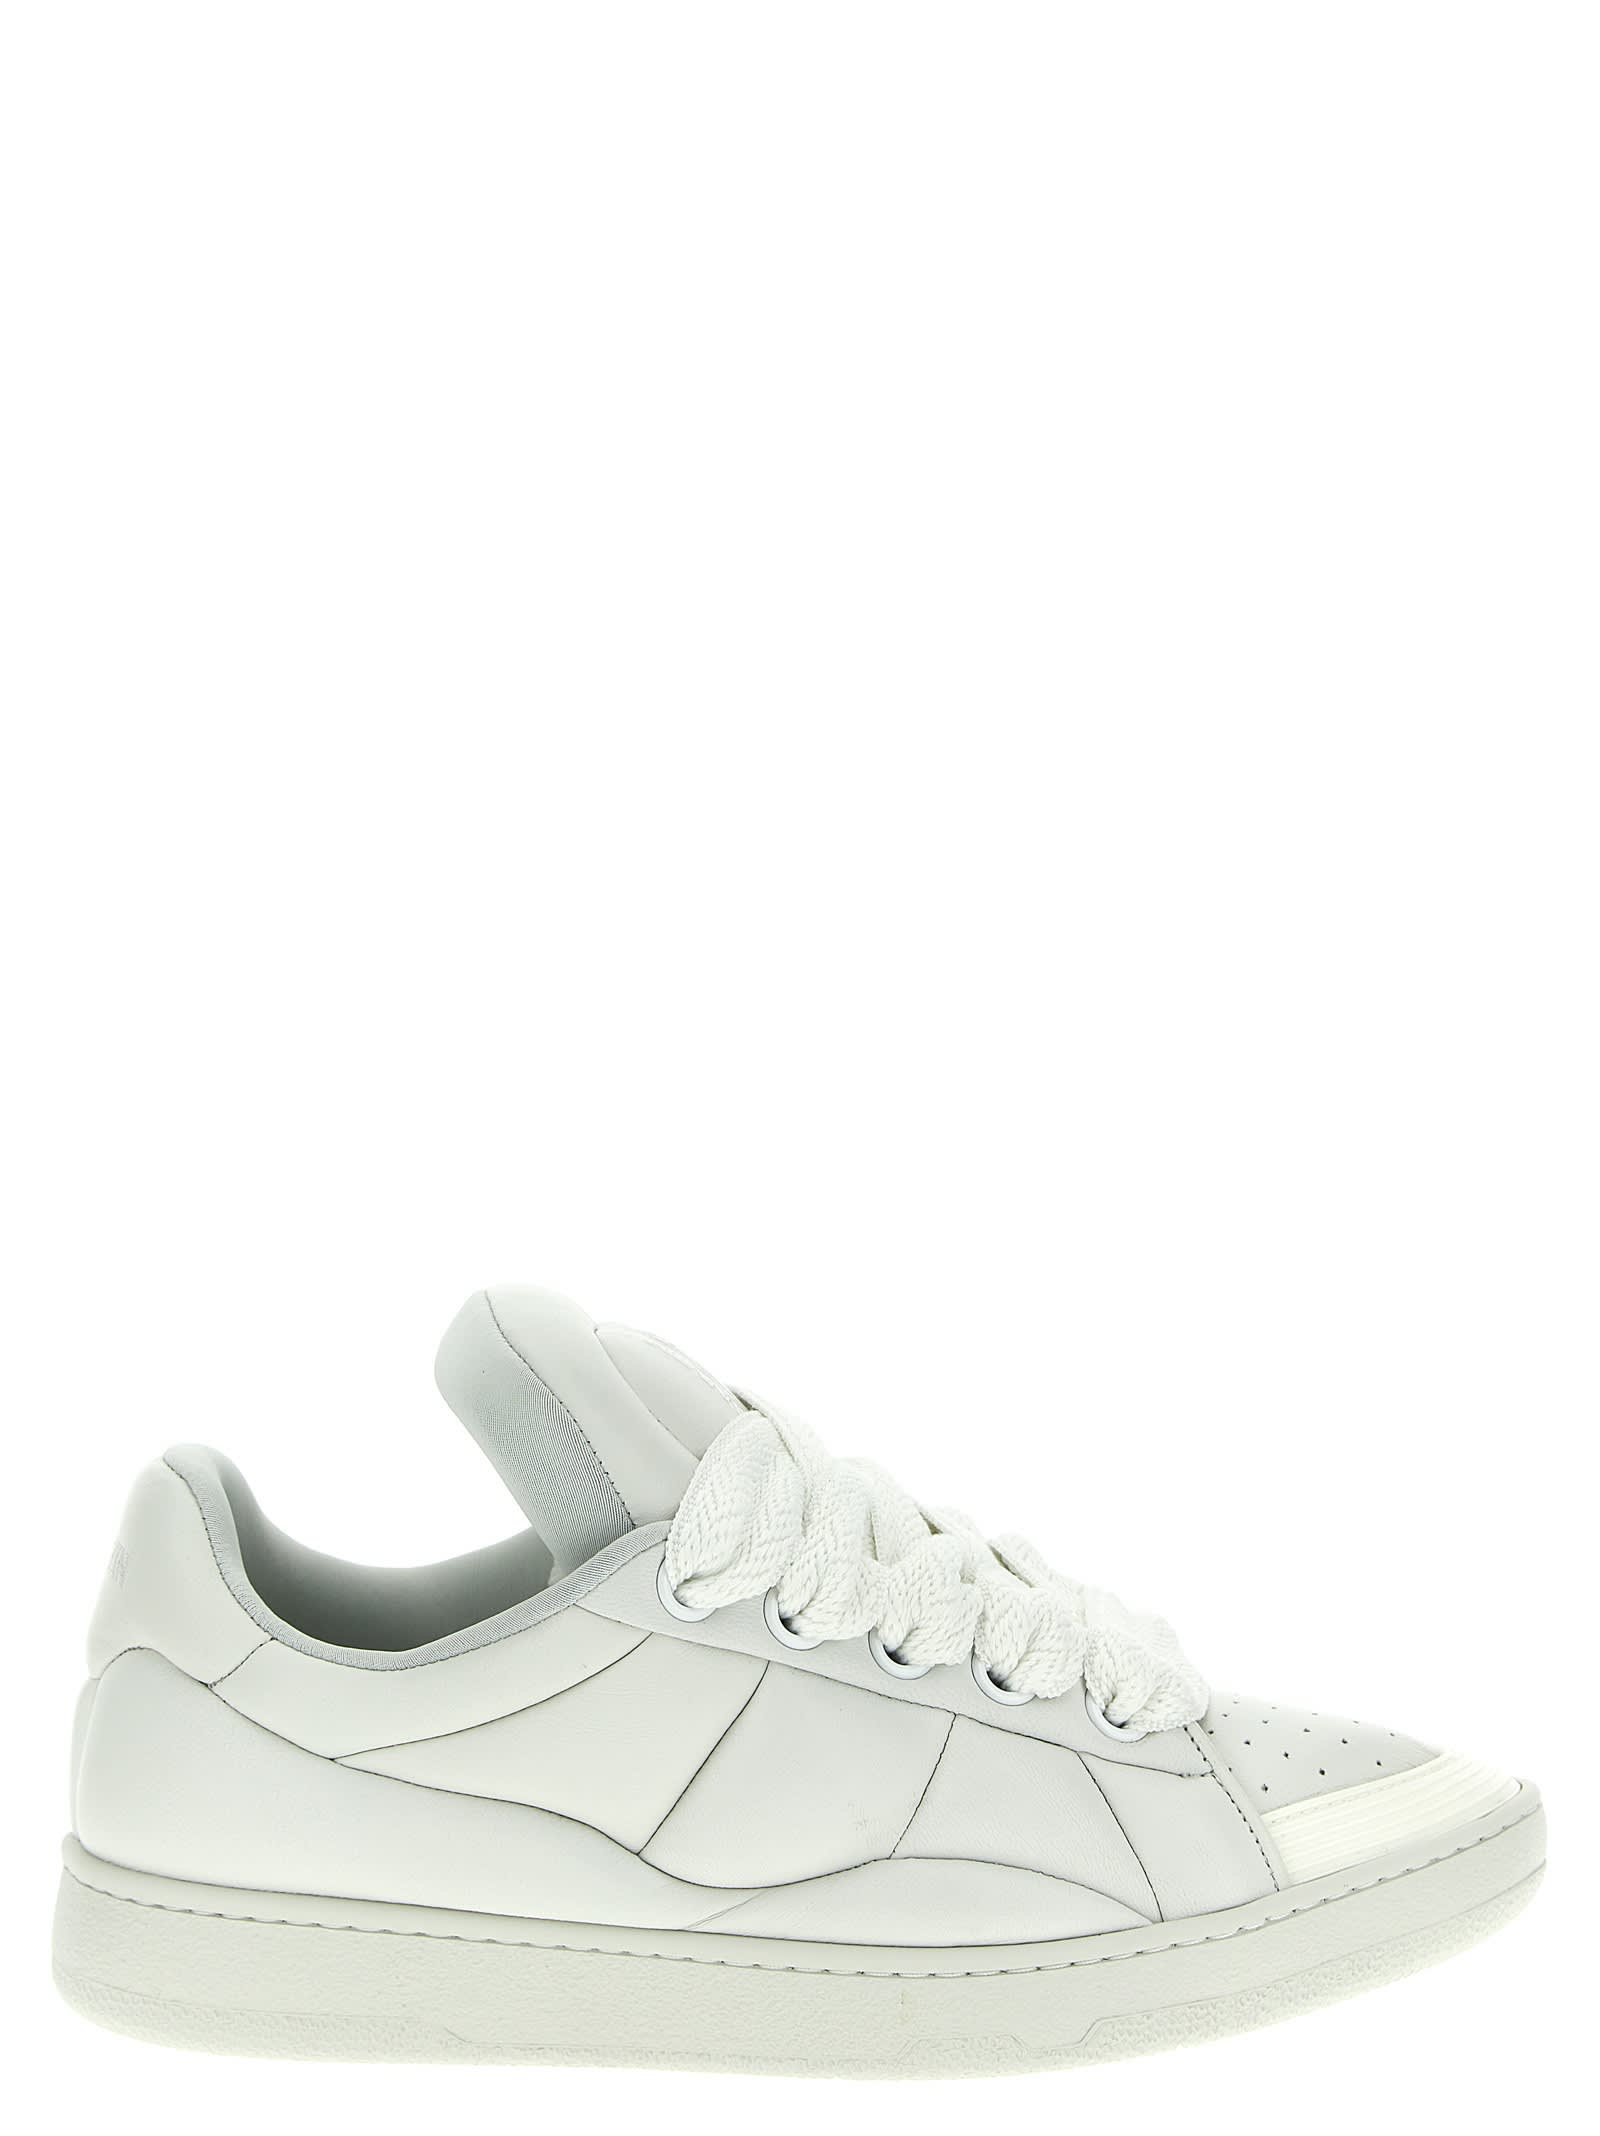 Lanvin Curb Xl Trainers In White